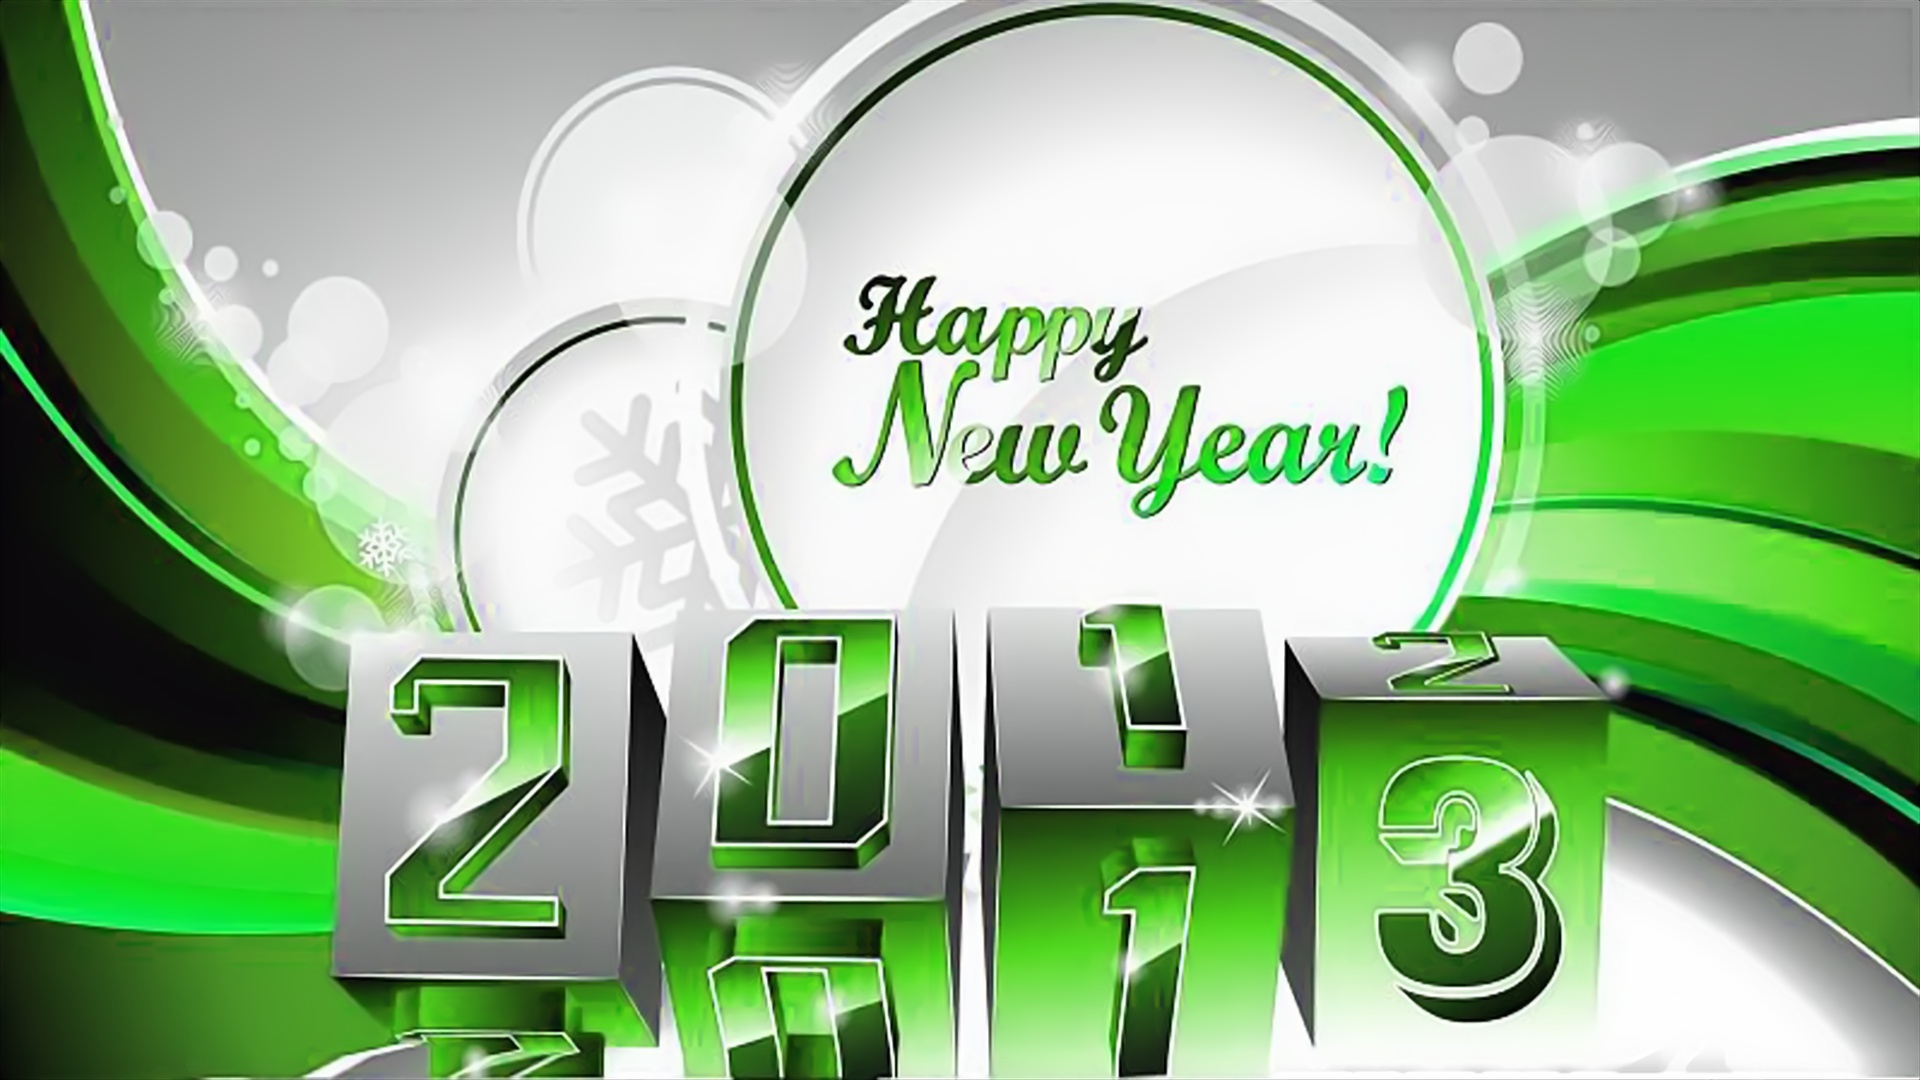 Happy New Year 2013 Pc Wallpaper - Happy New Year 2011 , HD Wallpaper & Backgrounds